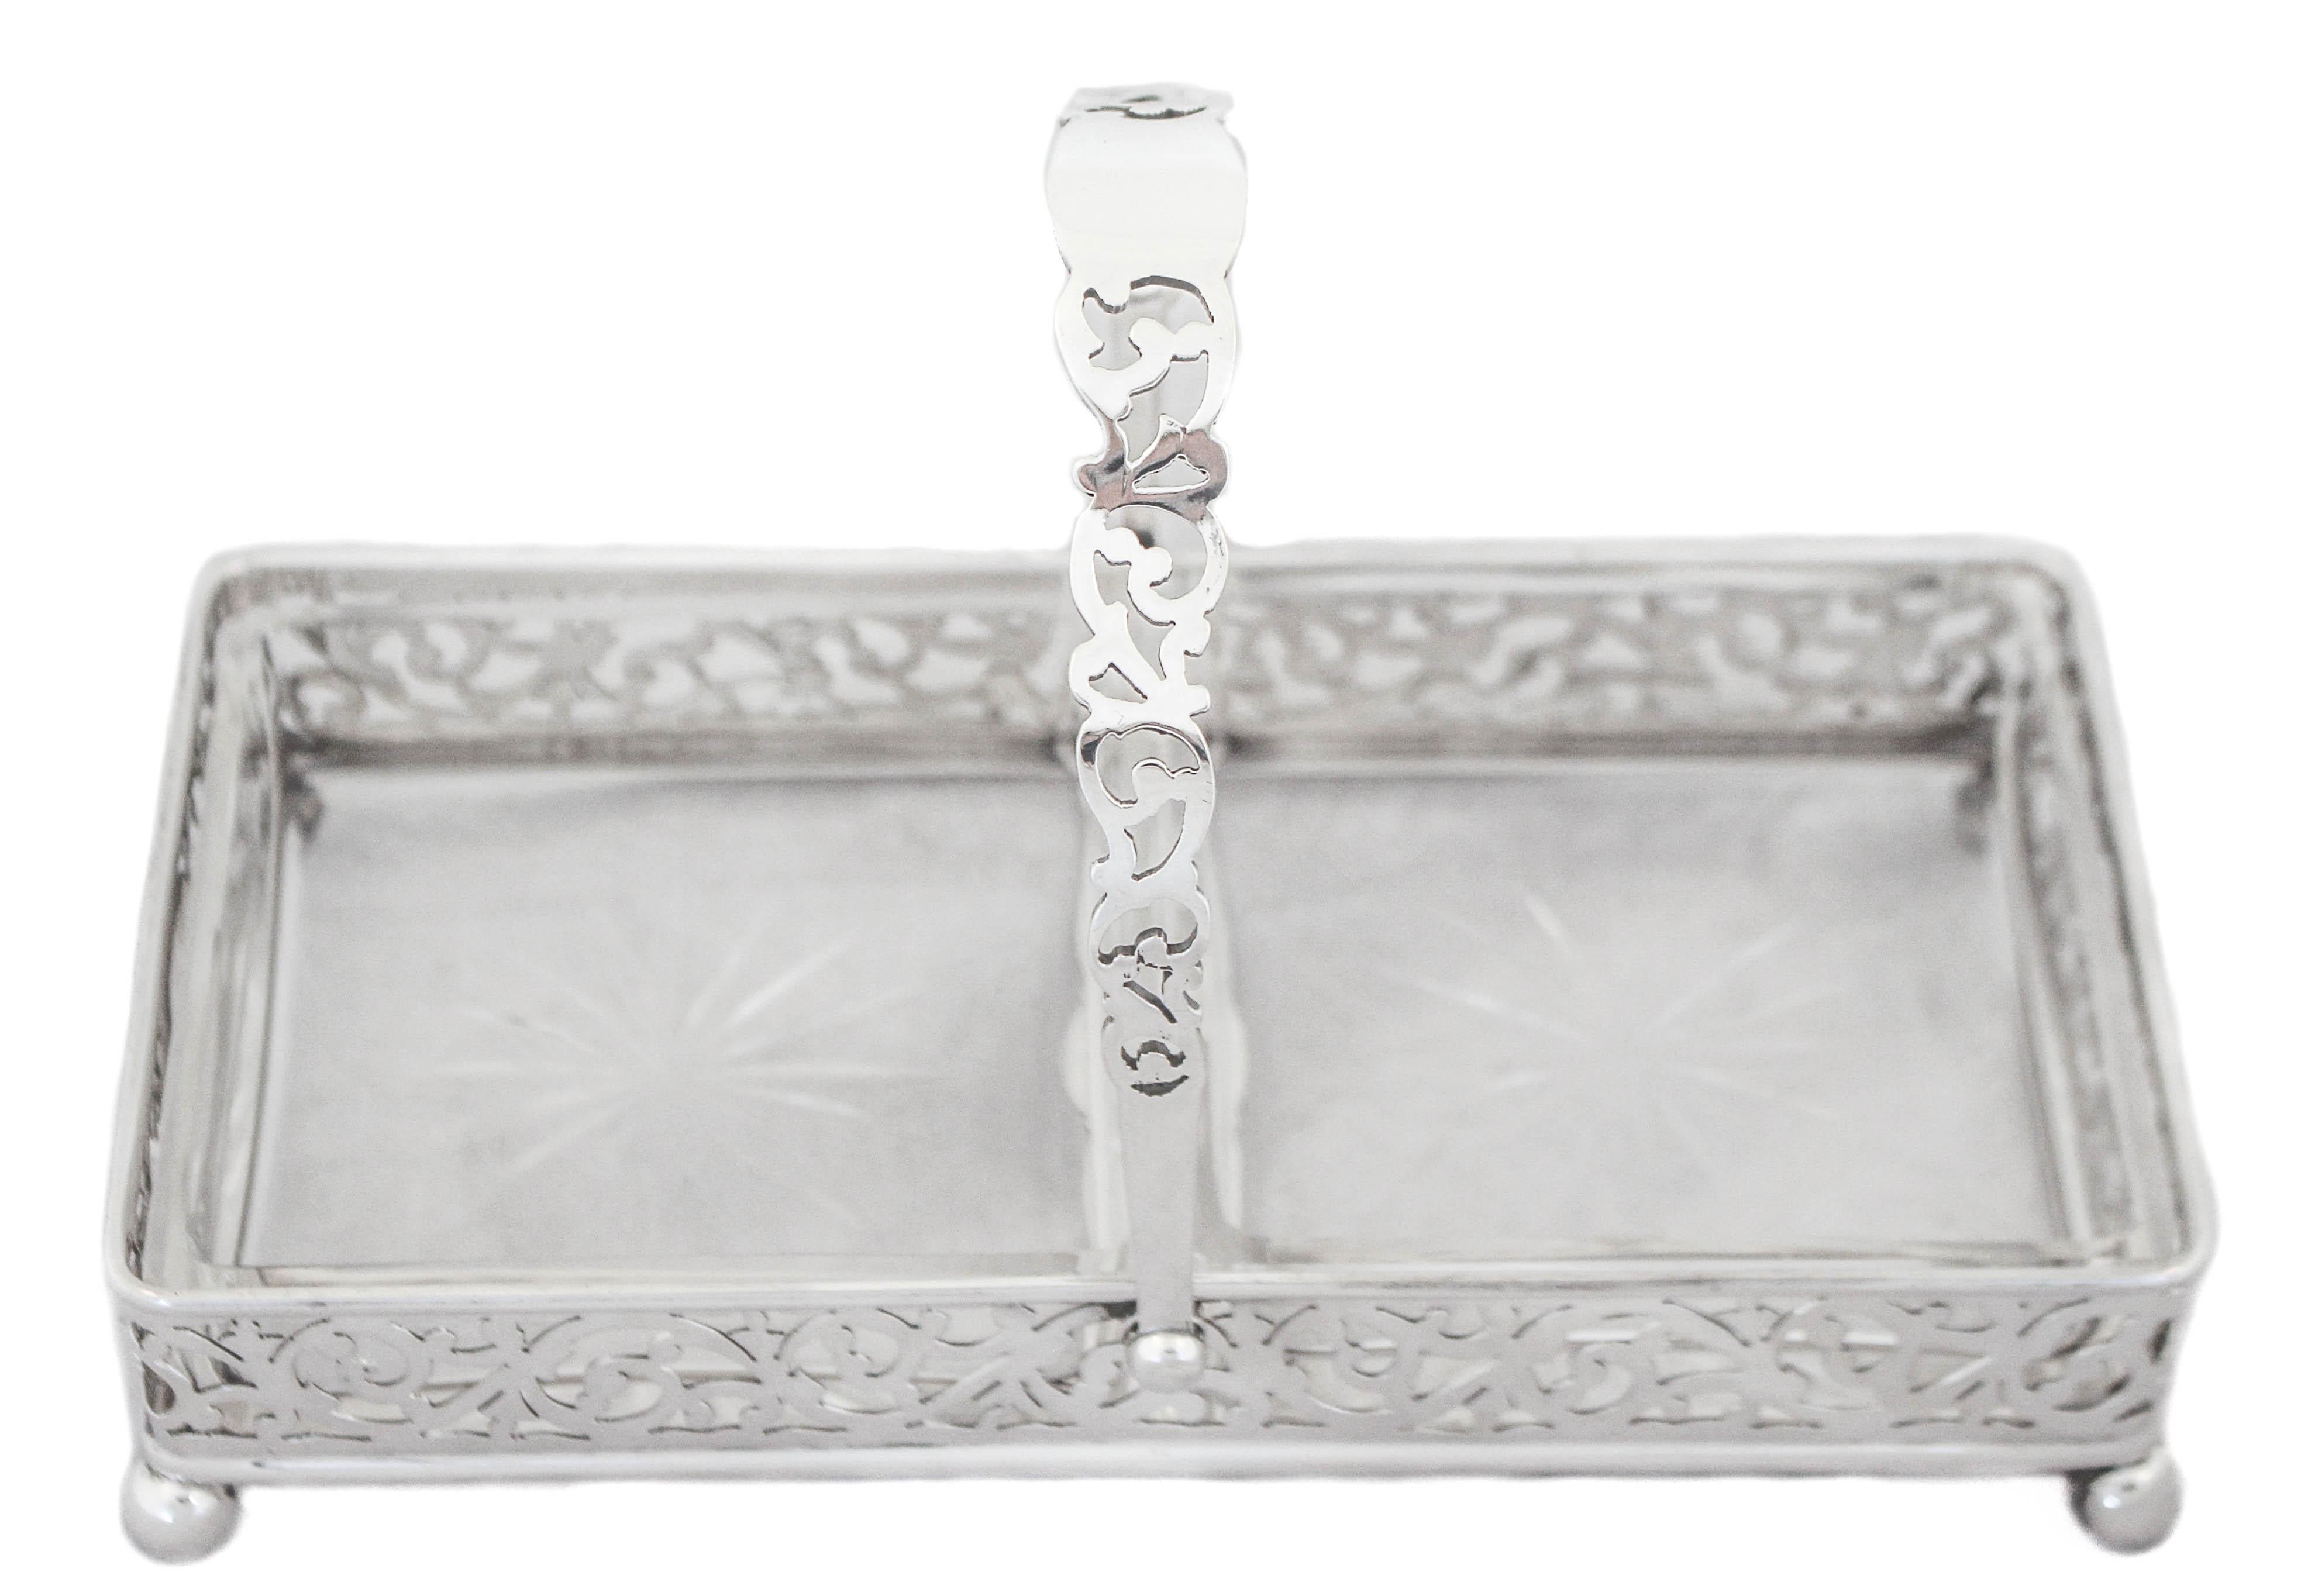 Being offered is a sterling silver basket with two square crystal sectionals. The body and handle have a lattice pattern that allows the glass to show through. Standing on four balls the basket is propped off the surface. The handle folds down for